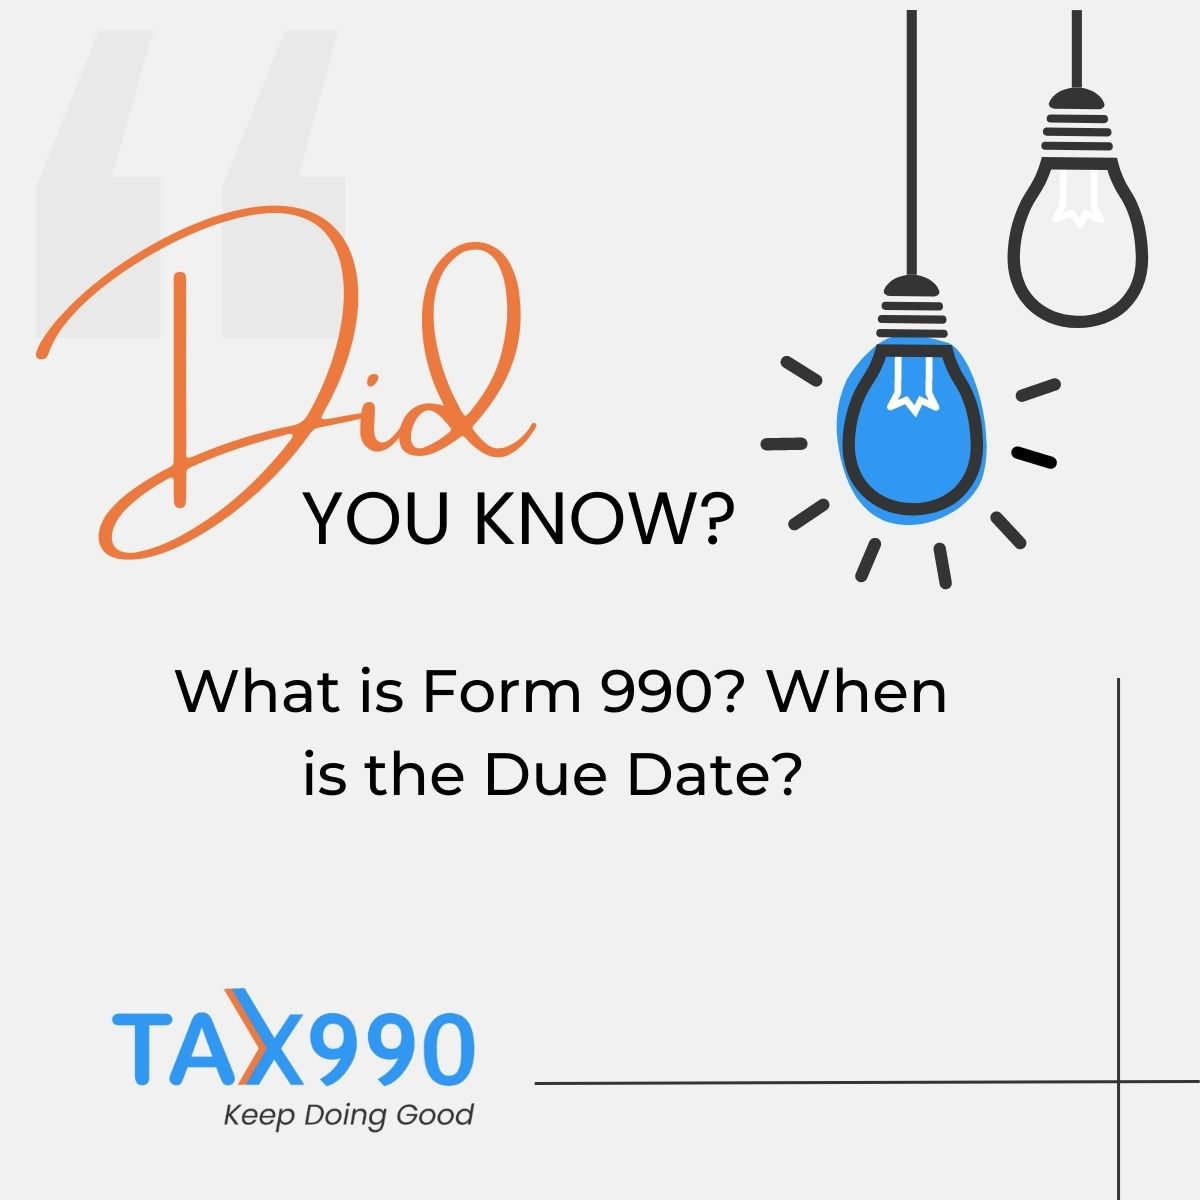 #DidYouKnow?

What exactly IS Form 990? When is it due?

Learn more about Series 990 Forms: bit.ly/3Qw8bF6  

E-file now with Tax990!

#Form990 #IRSForm990 #990Form #whatisForm990 #form990 #990return #990deadline #990duedate #Quora